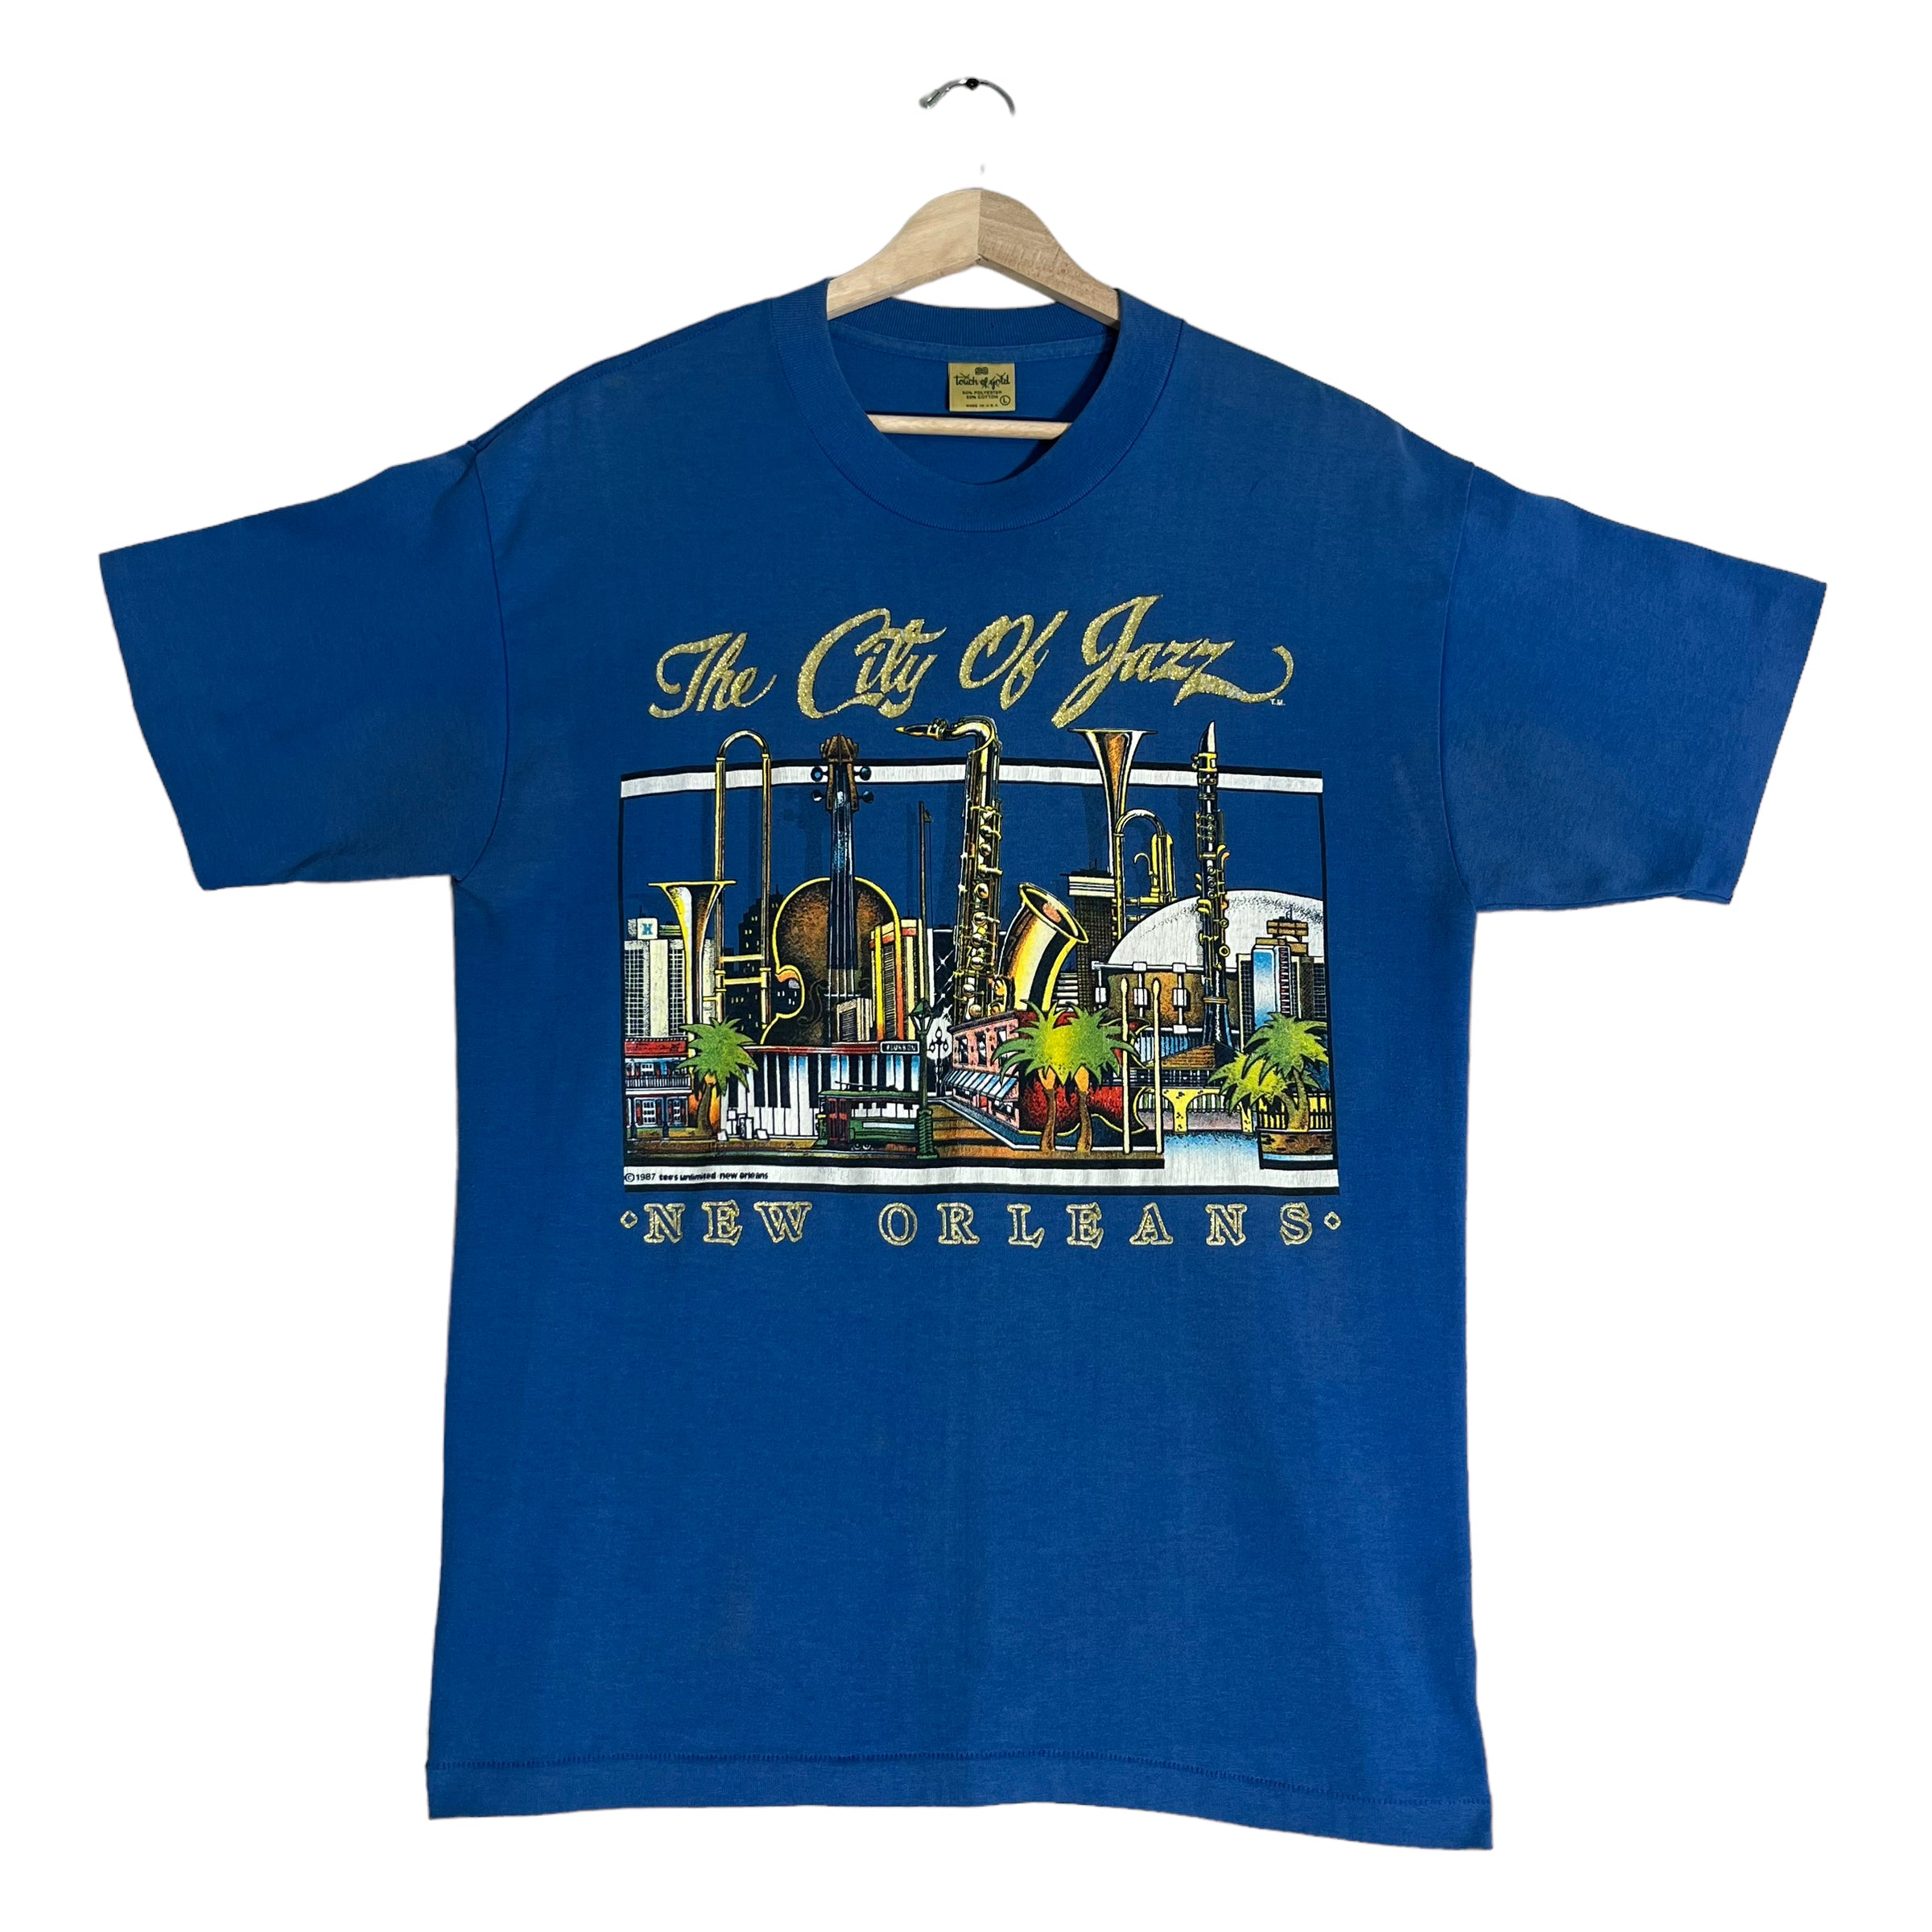 Vintage New Orleans "The City of Jazz" Tee